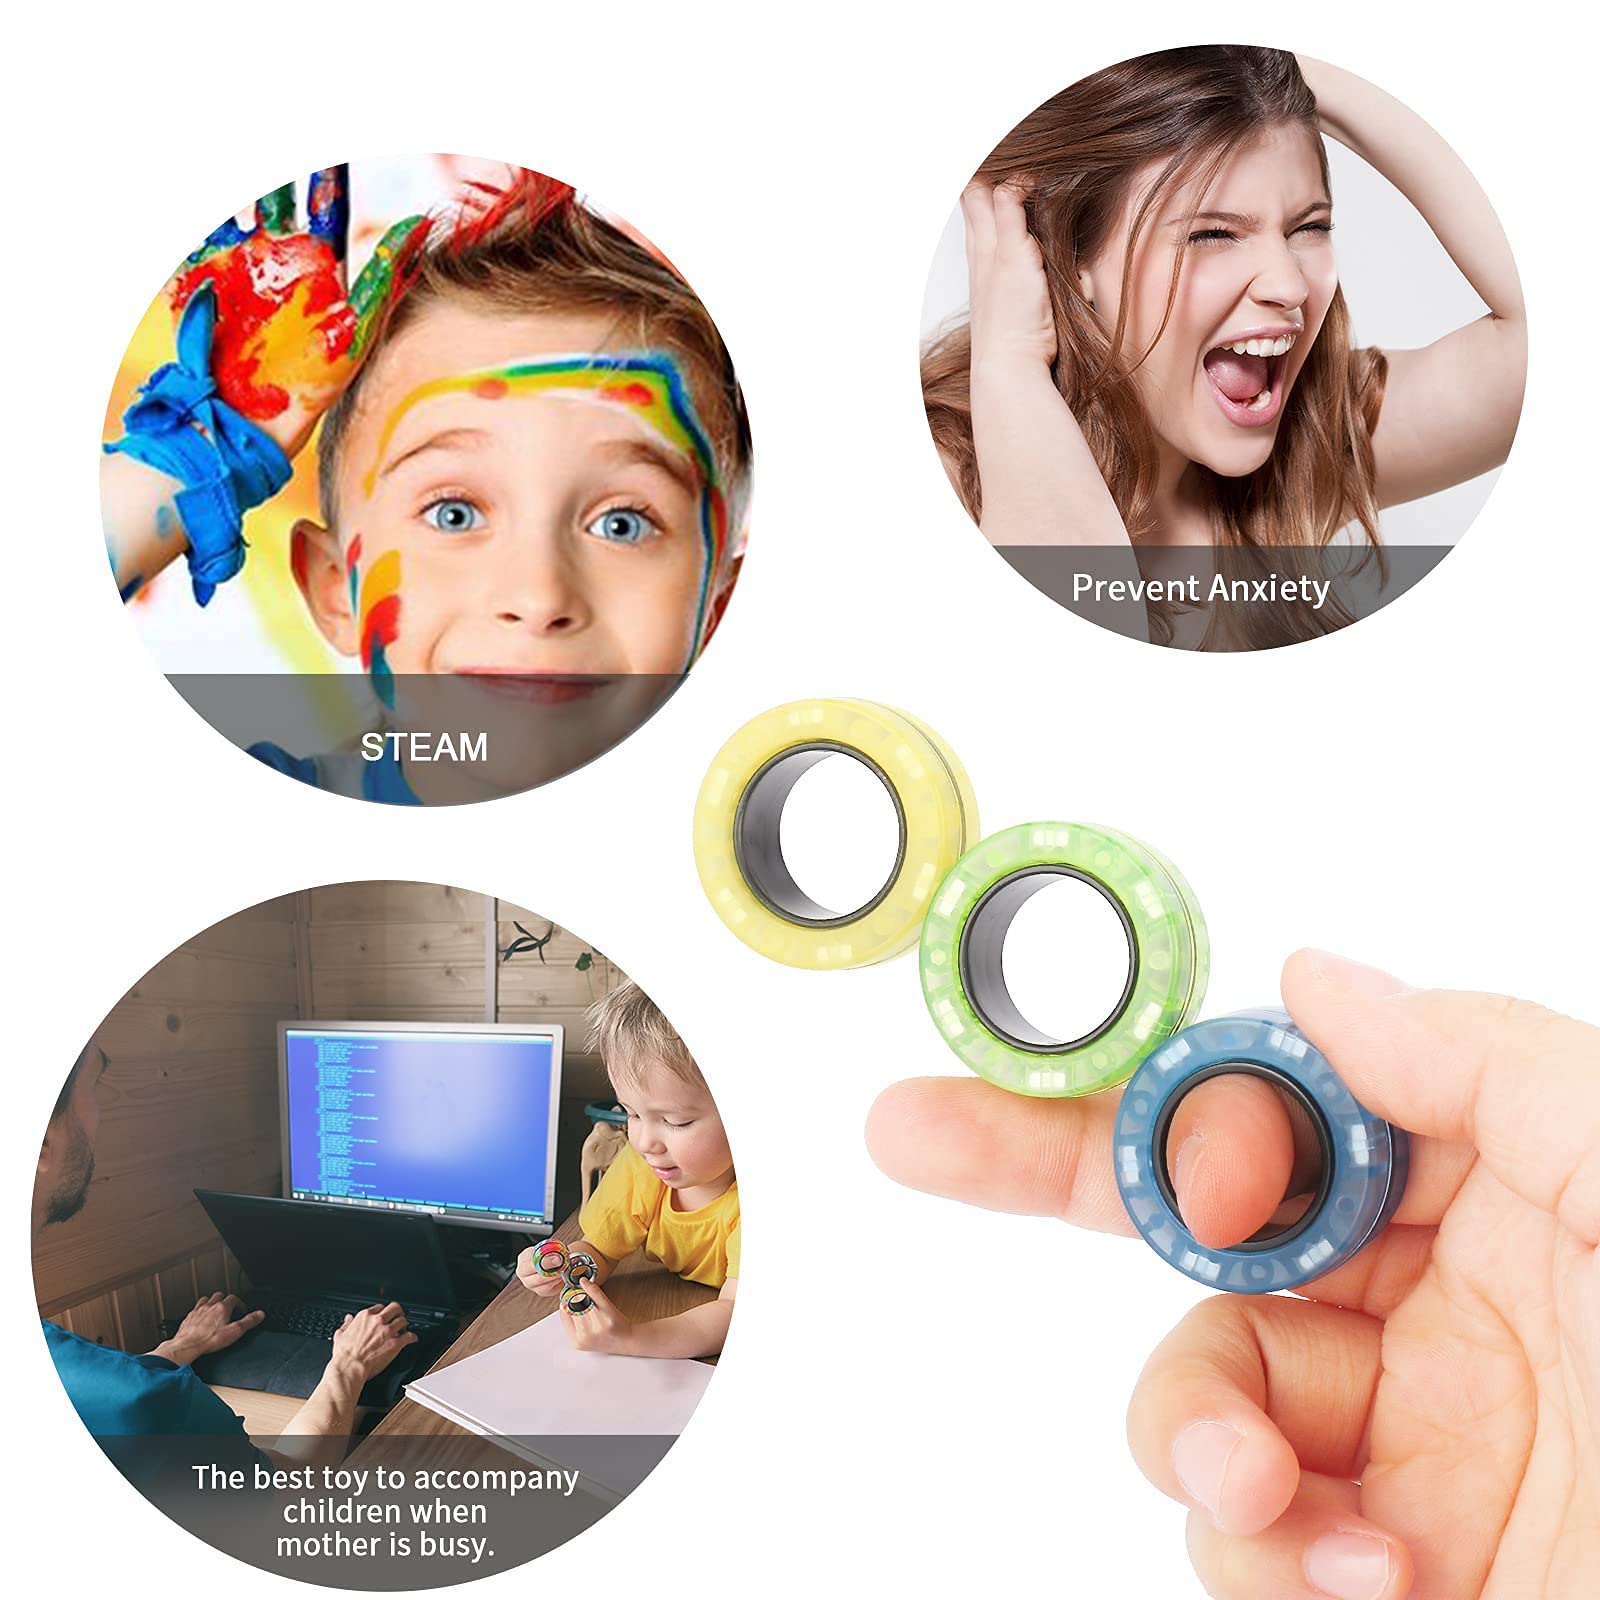 3PCS Magnetic Rings Fidget Toy Set, Idea ADHD Hand Exerciser Fidget Toys, Adult Fidget Magnets Spinner Rings for Anxiety Relief Therapy, Fidget Pack Great Gift for Adults Teens Kids - amzGamess